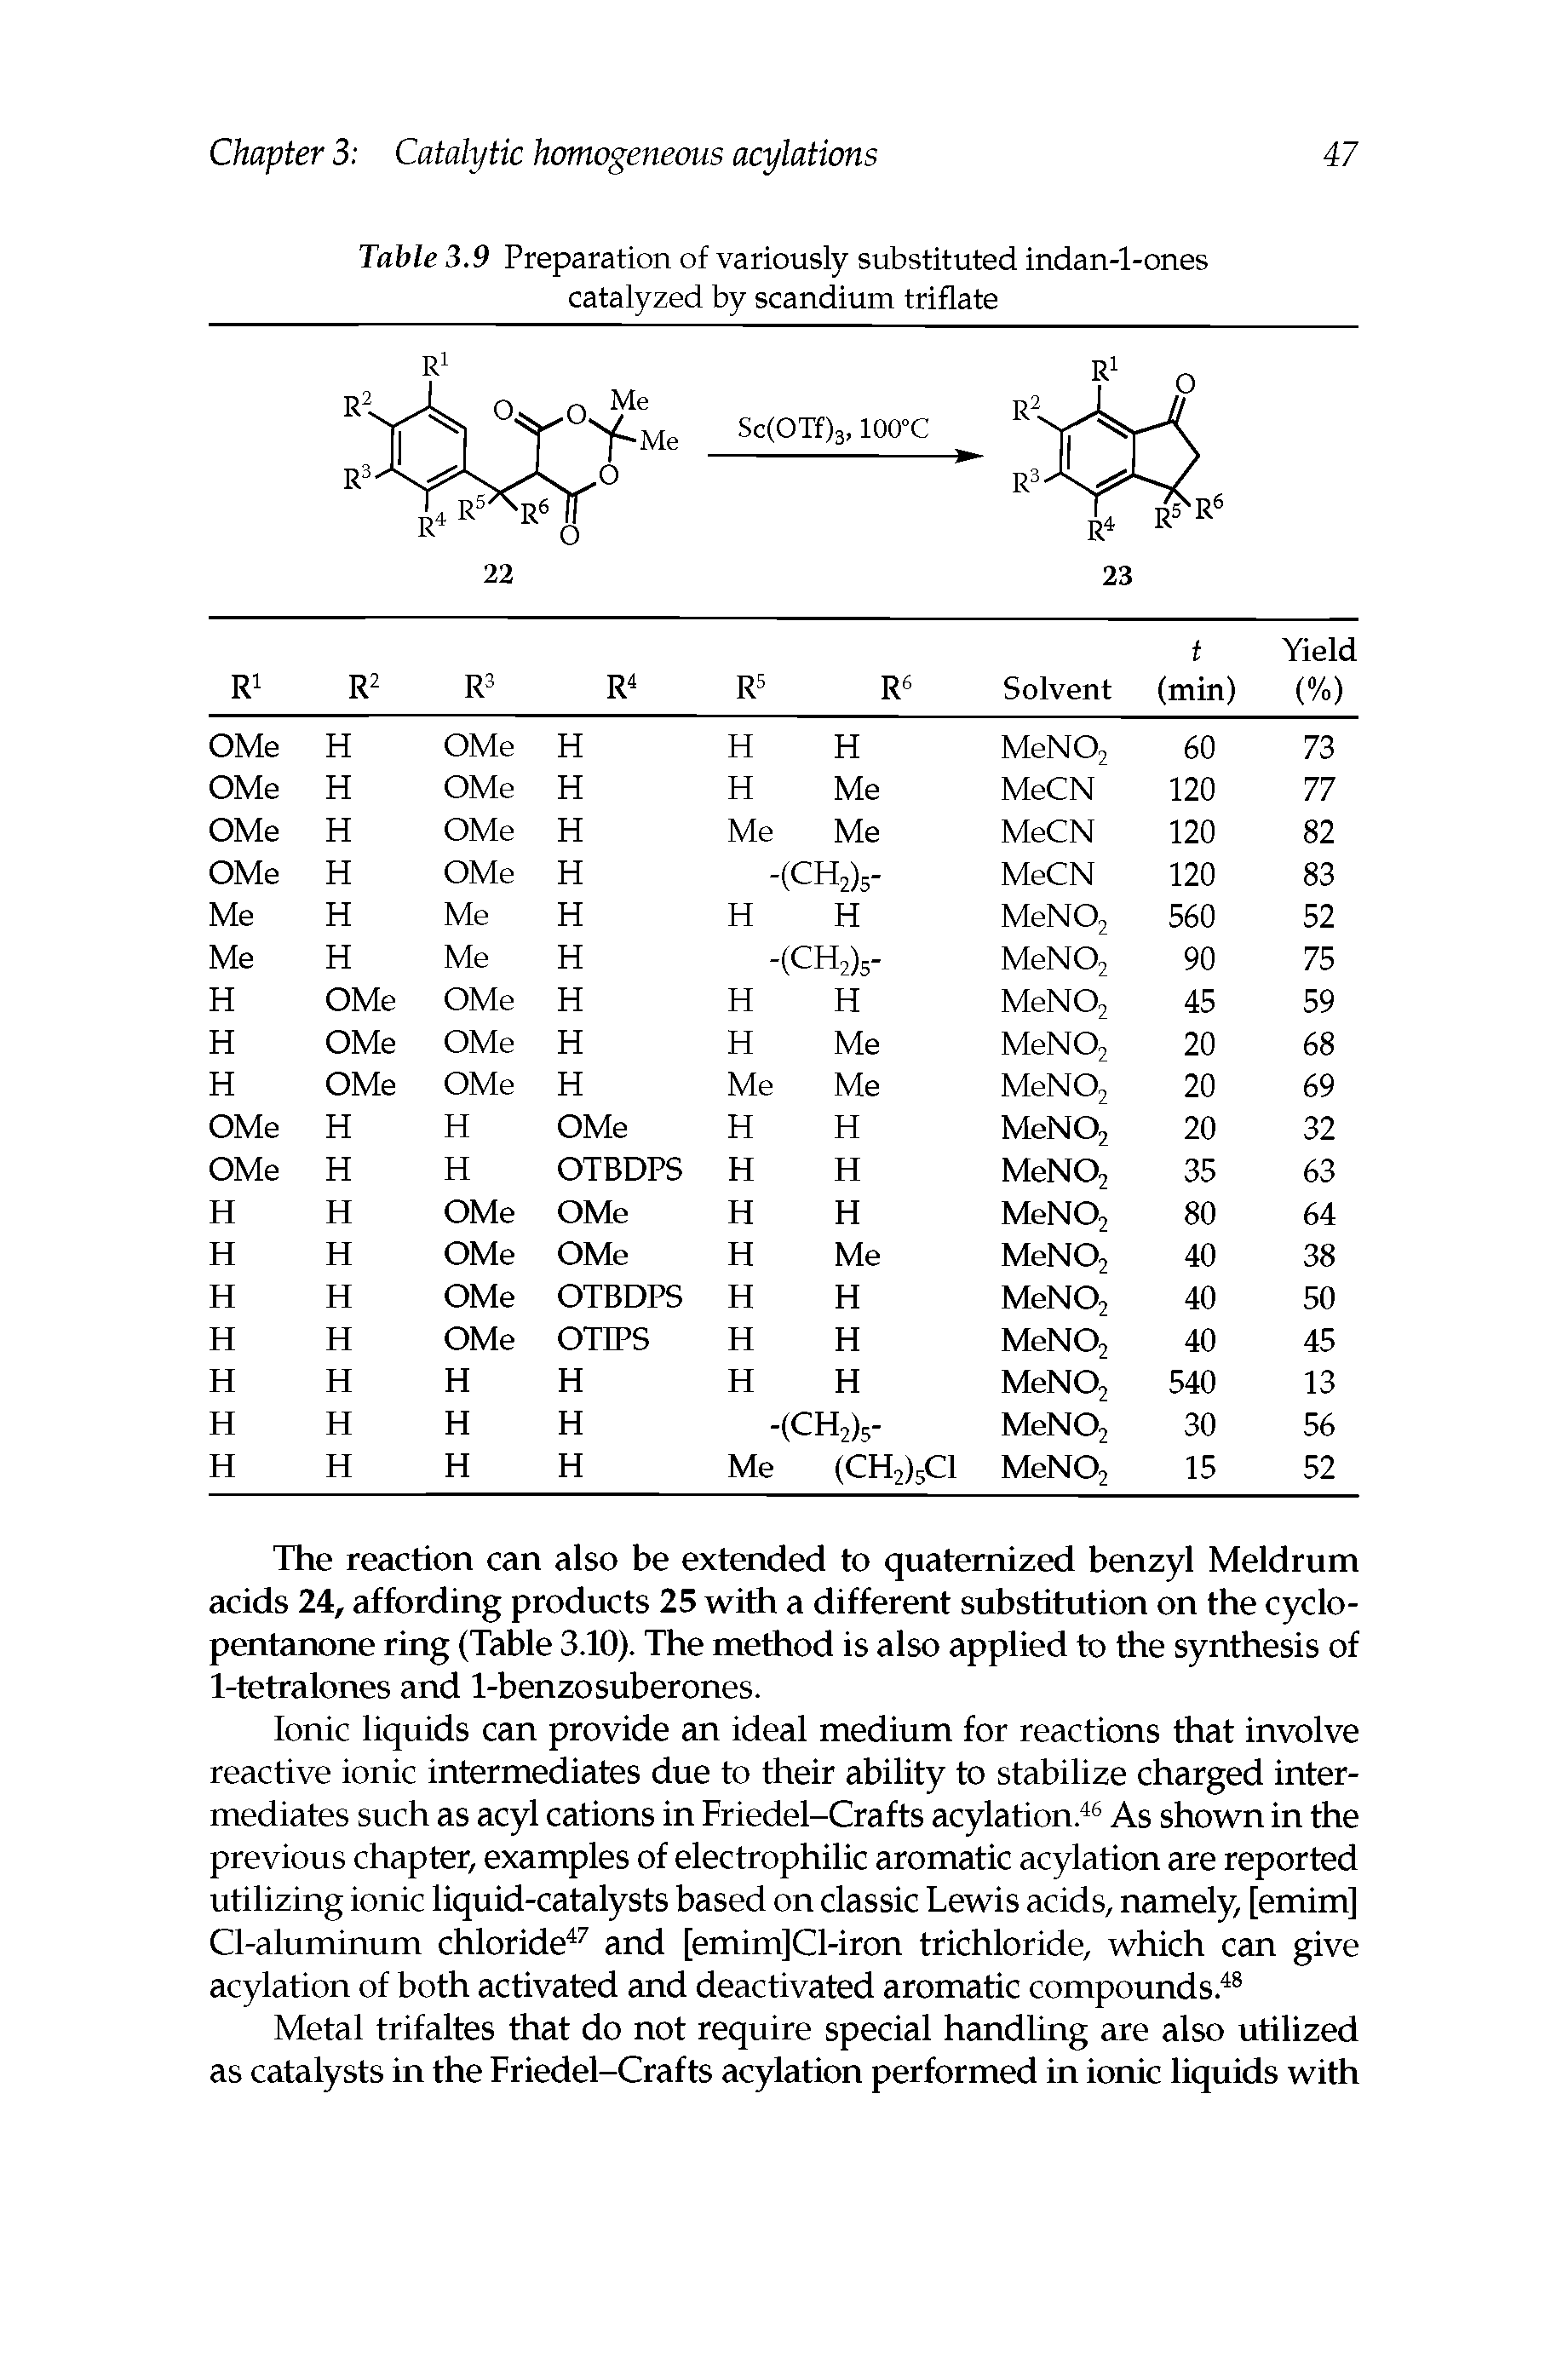 Table 3.9 Preparation of variously substituted indan-l-ones catalyzed by scandium triflate...